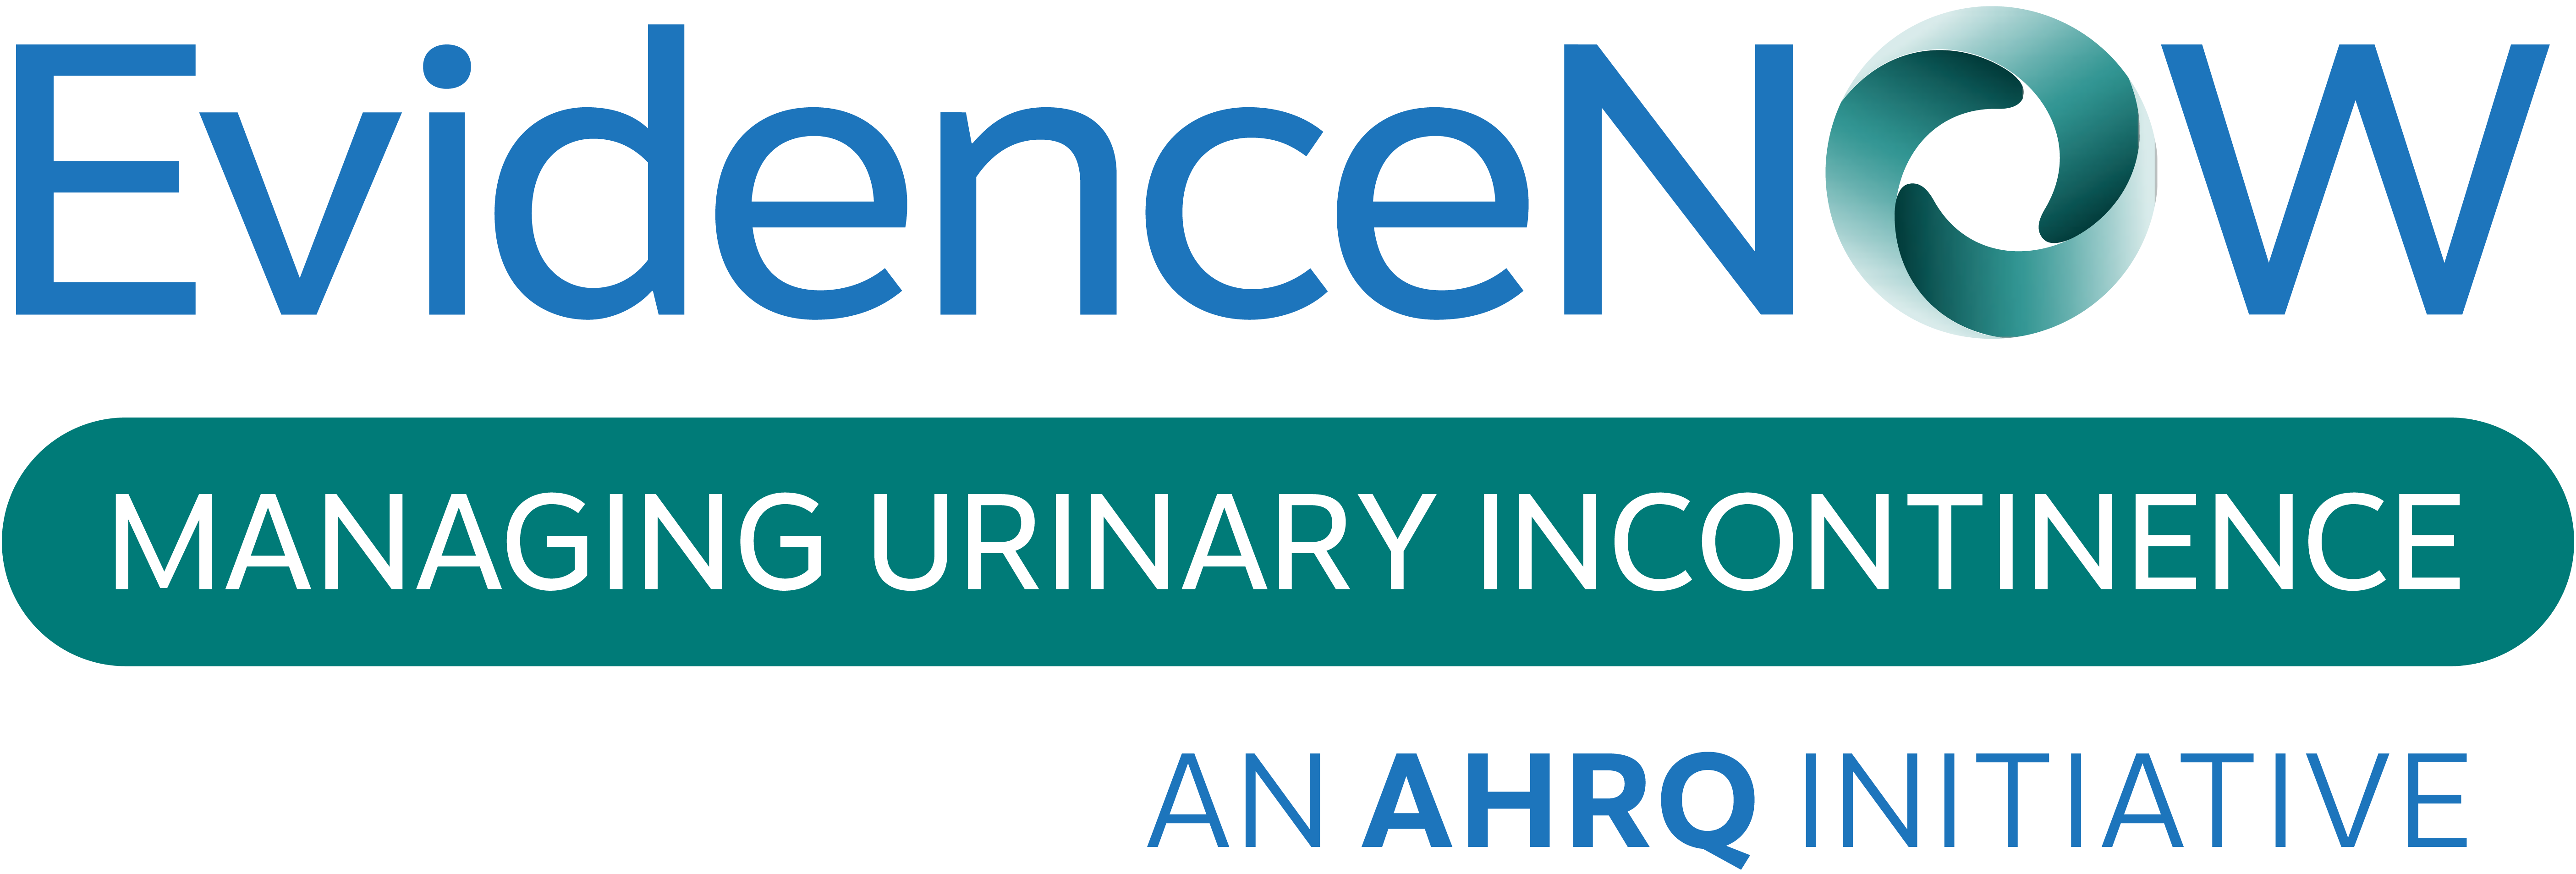 EvidenceNOW logo. Managing urinary incontinence. An AHRQ initiative.